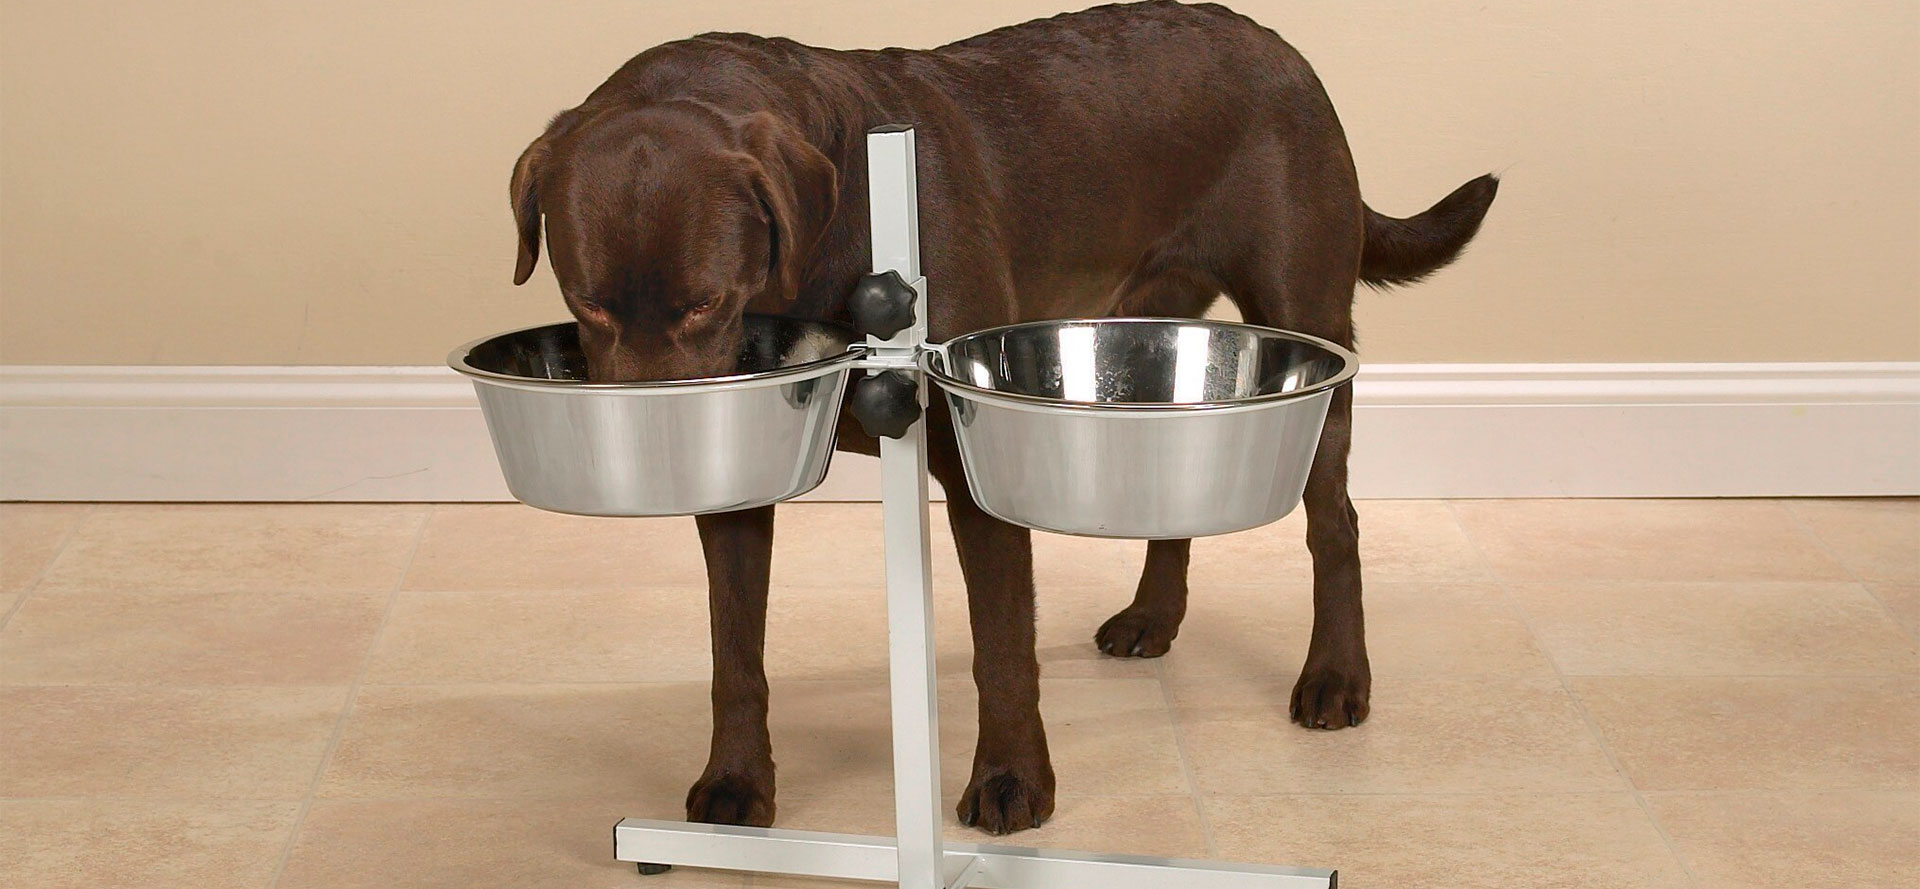 Dog eating from elevated dog bowls.